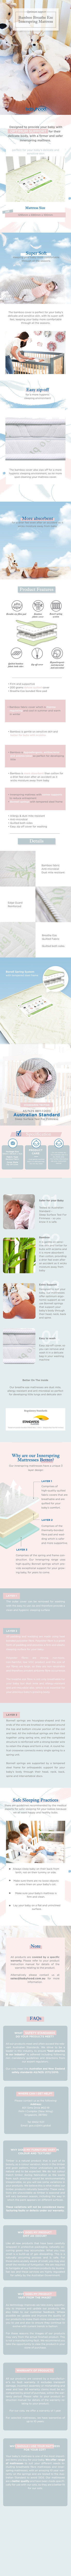 baby baby products babyhood care e-commerce Ecommerce mom newborn online store shop